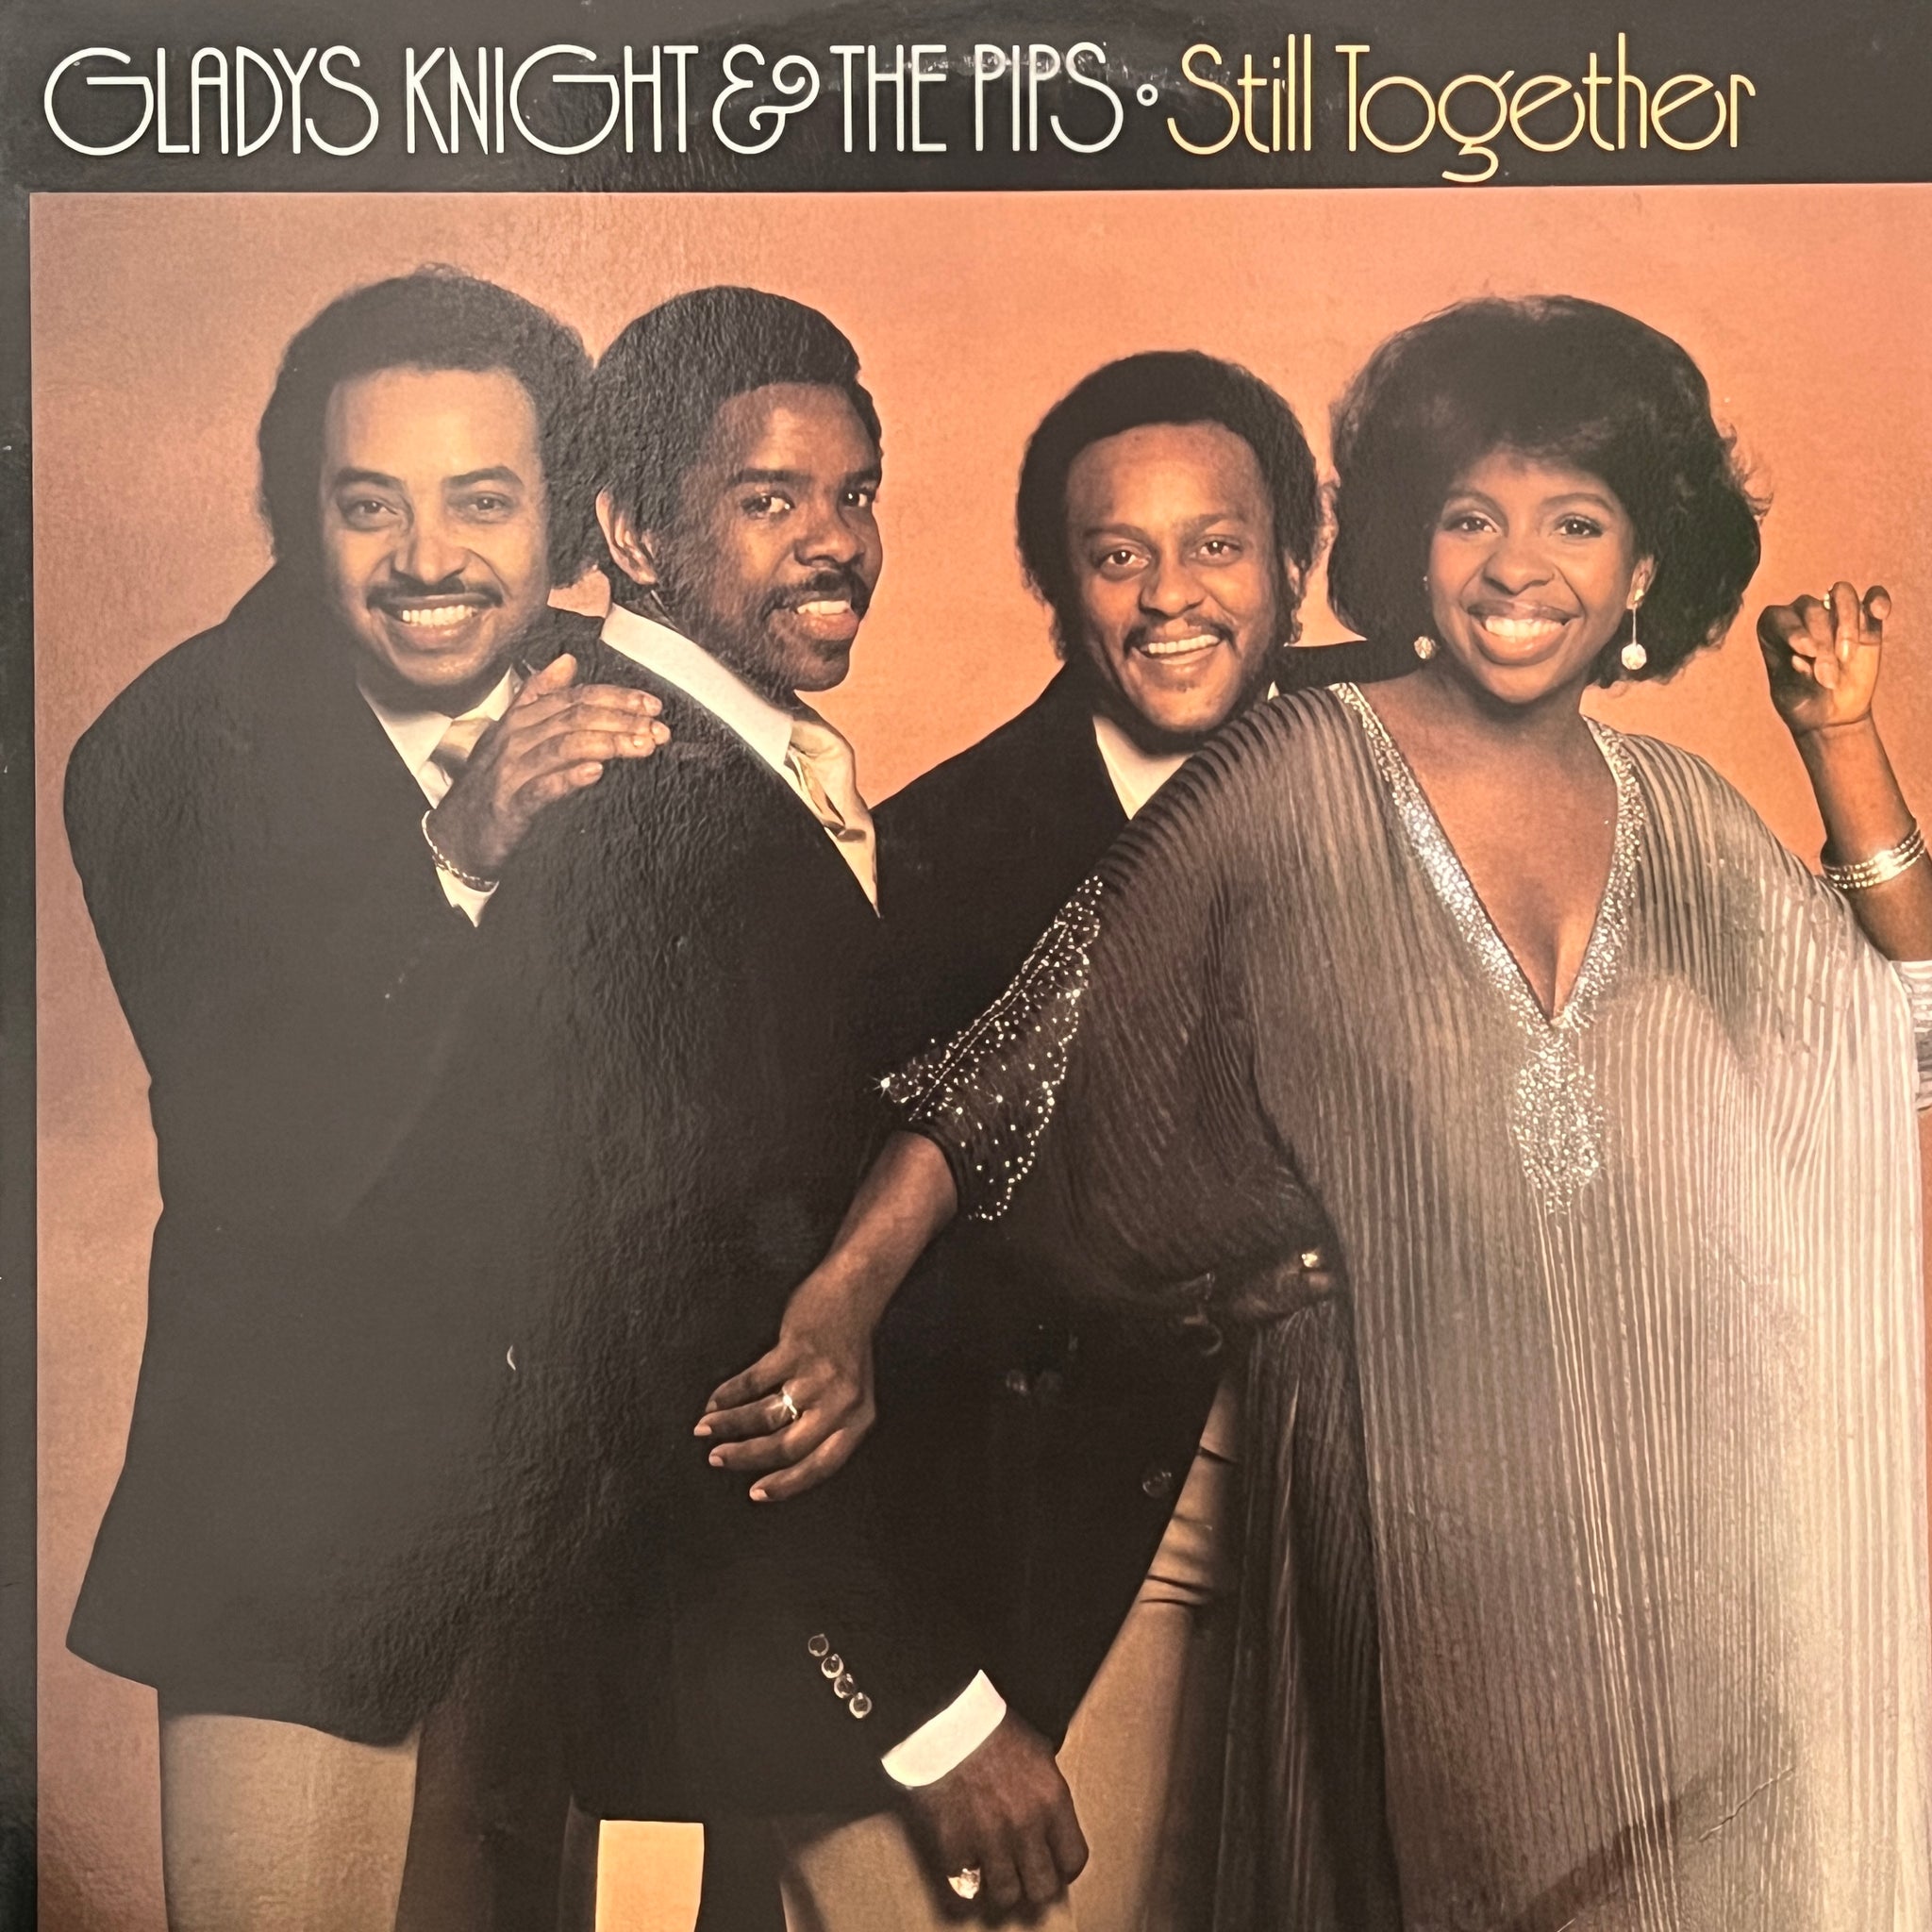 Gladys Knight & The Pips* – Still Together